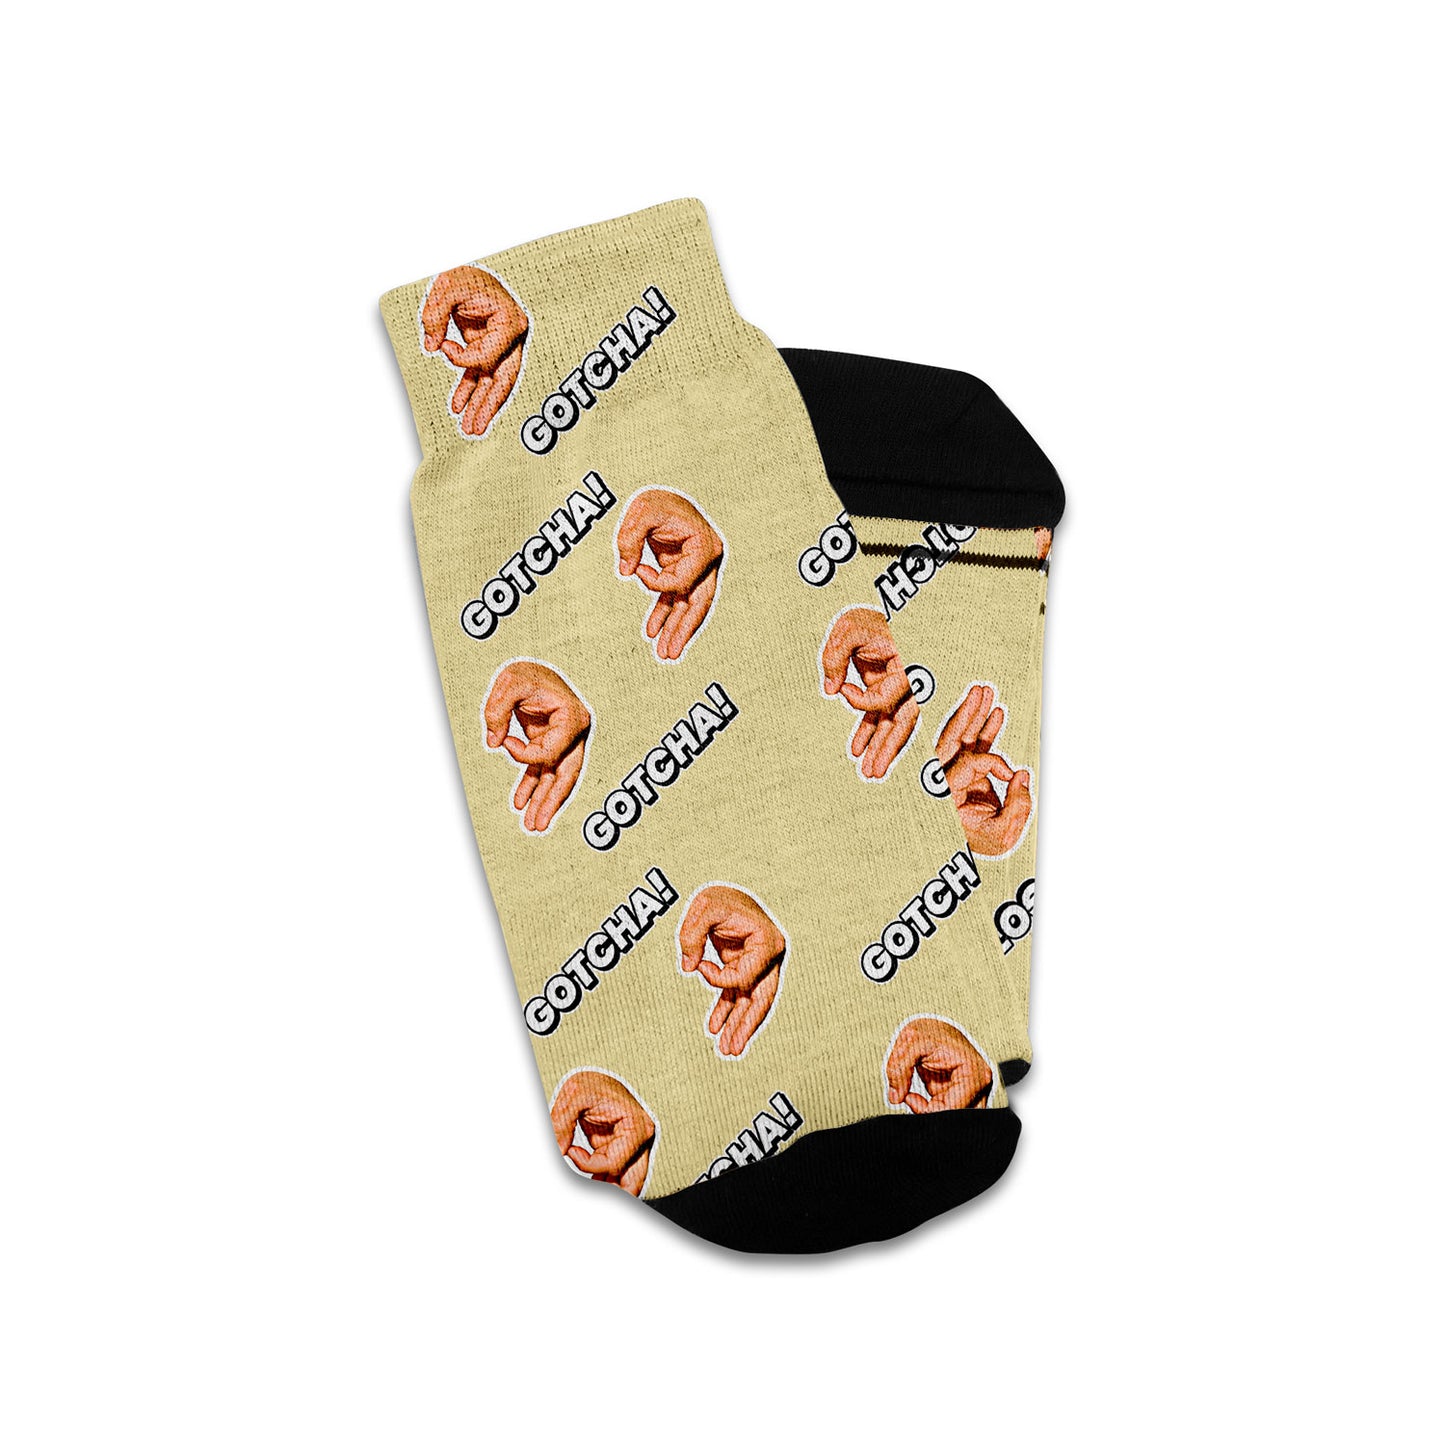 inside joke gift socks personalized with objects and text